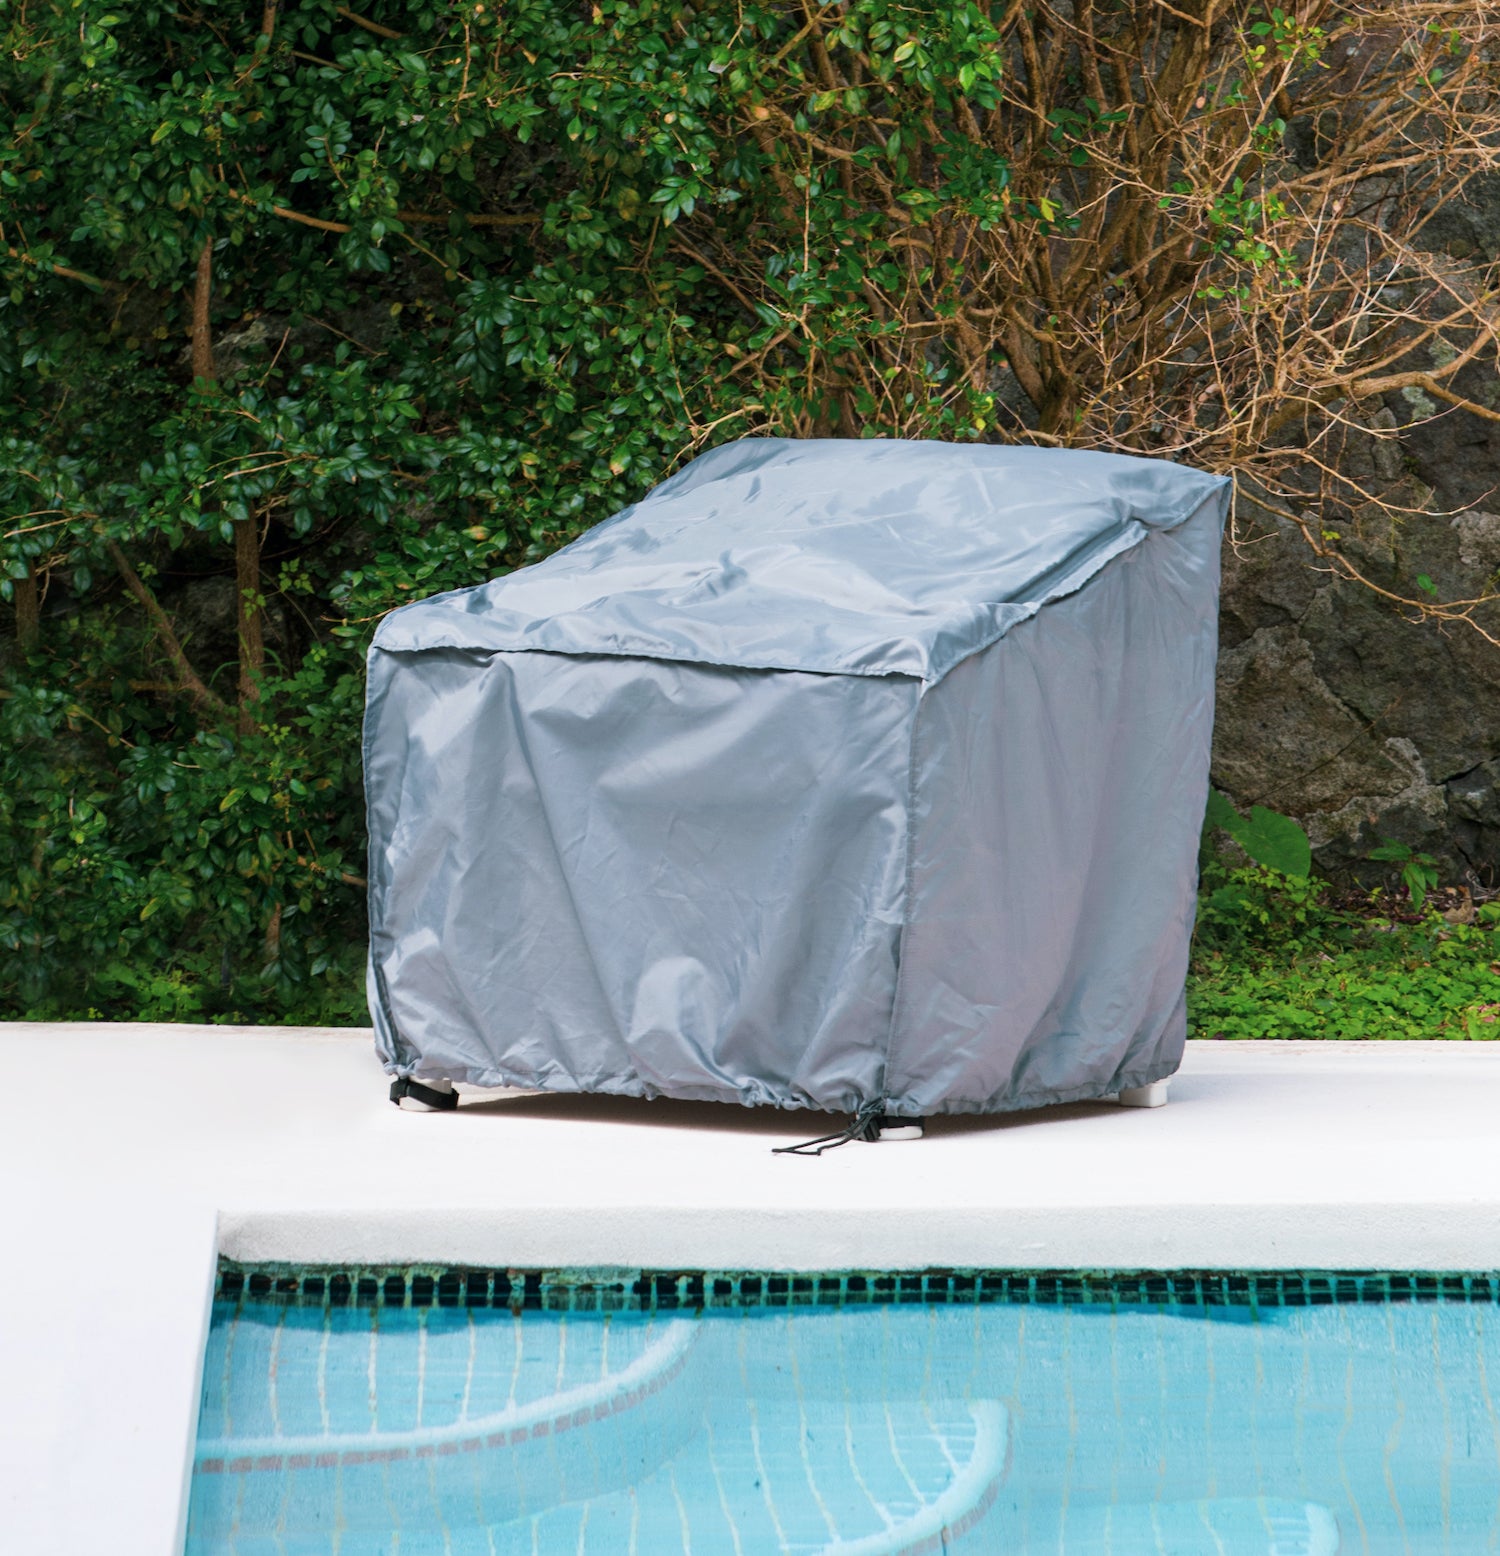 Pillow-to-Cover covering an outdoor club chair by the pool